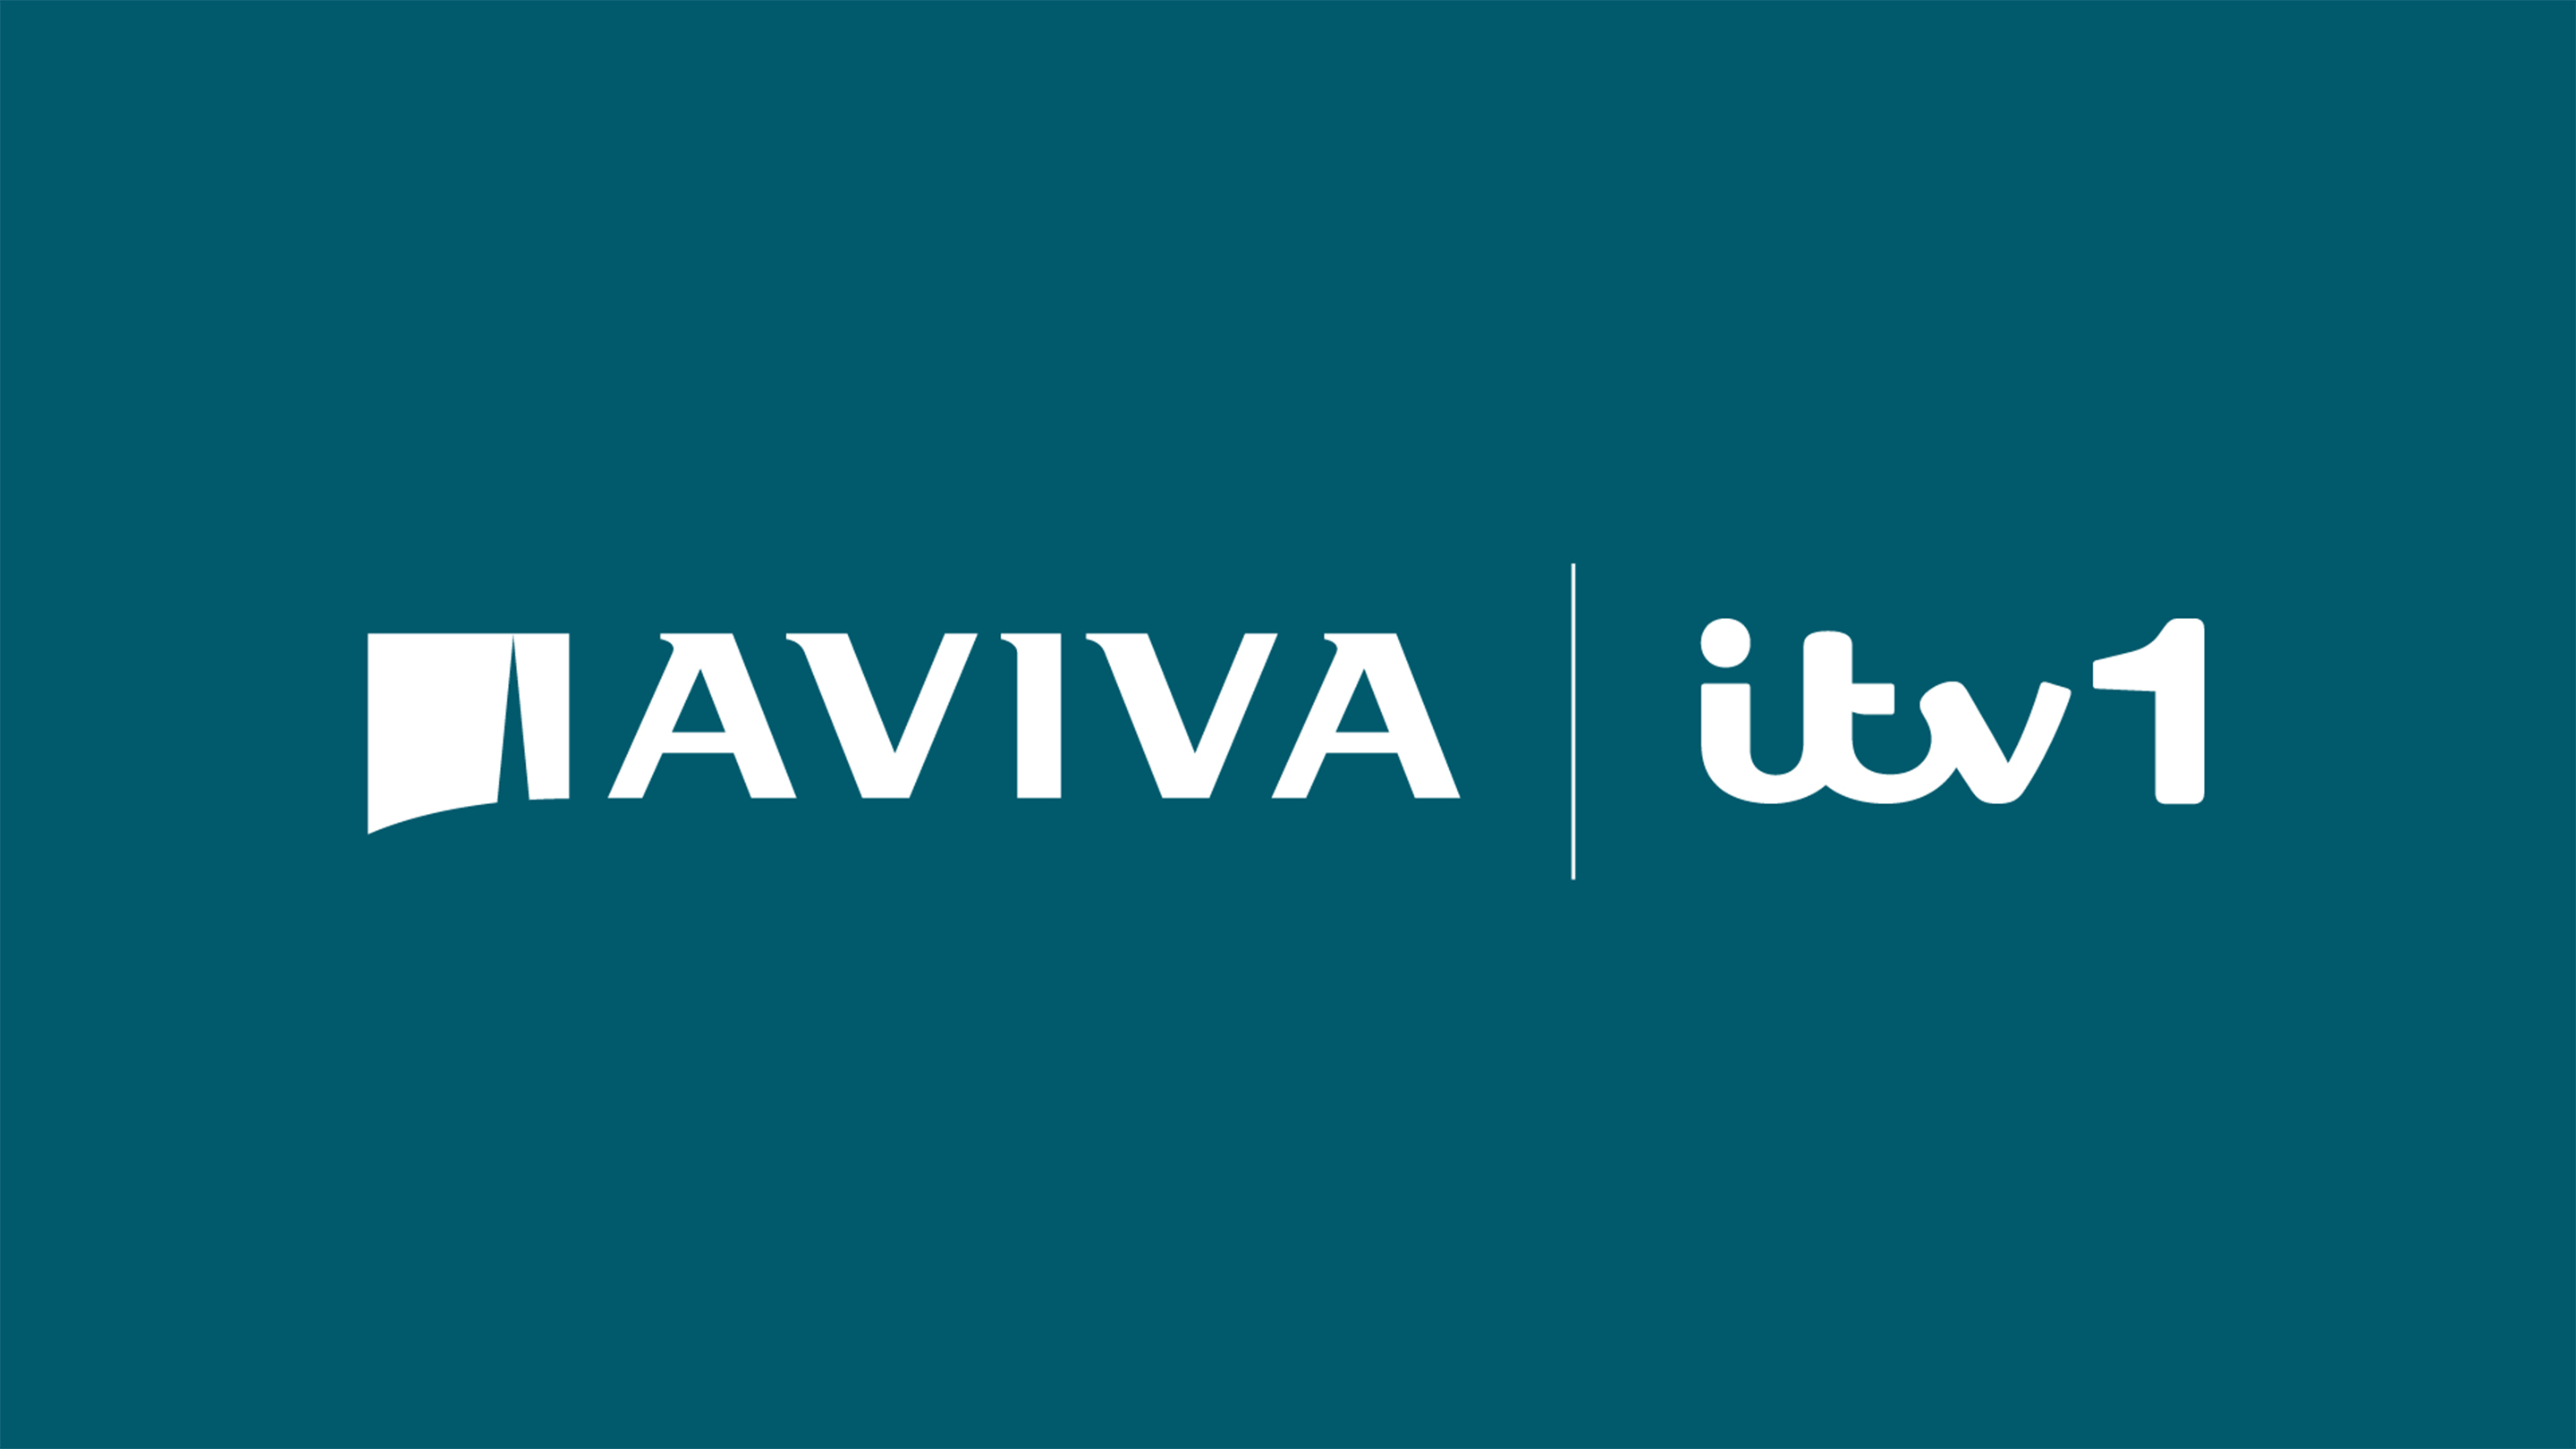 Aviva and ITV logos on a teal background